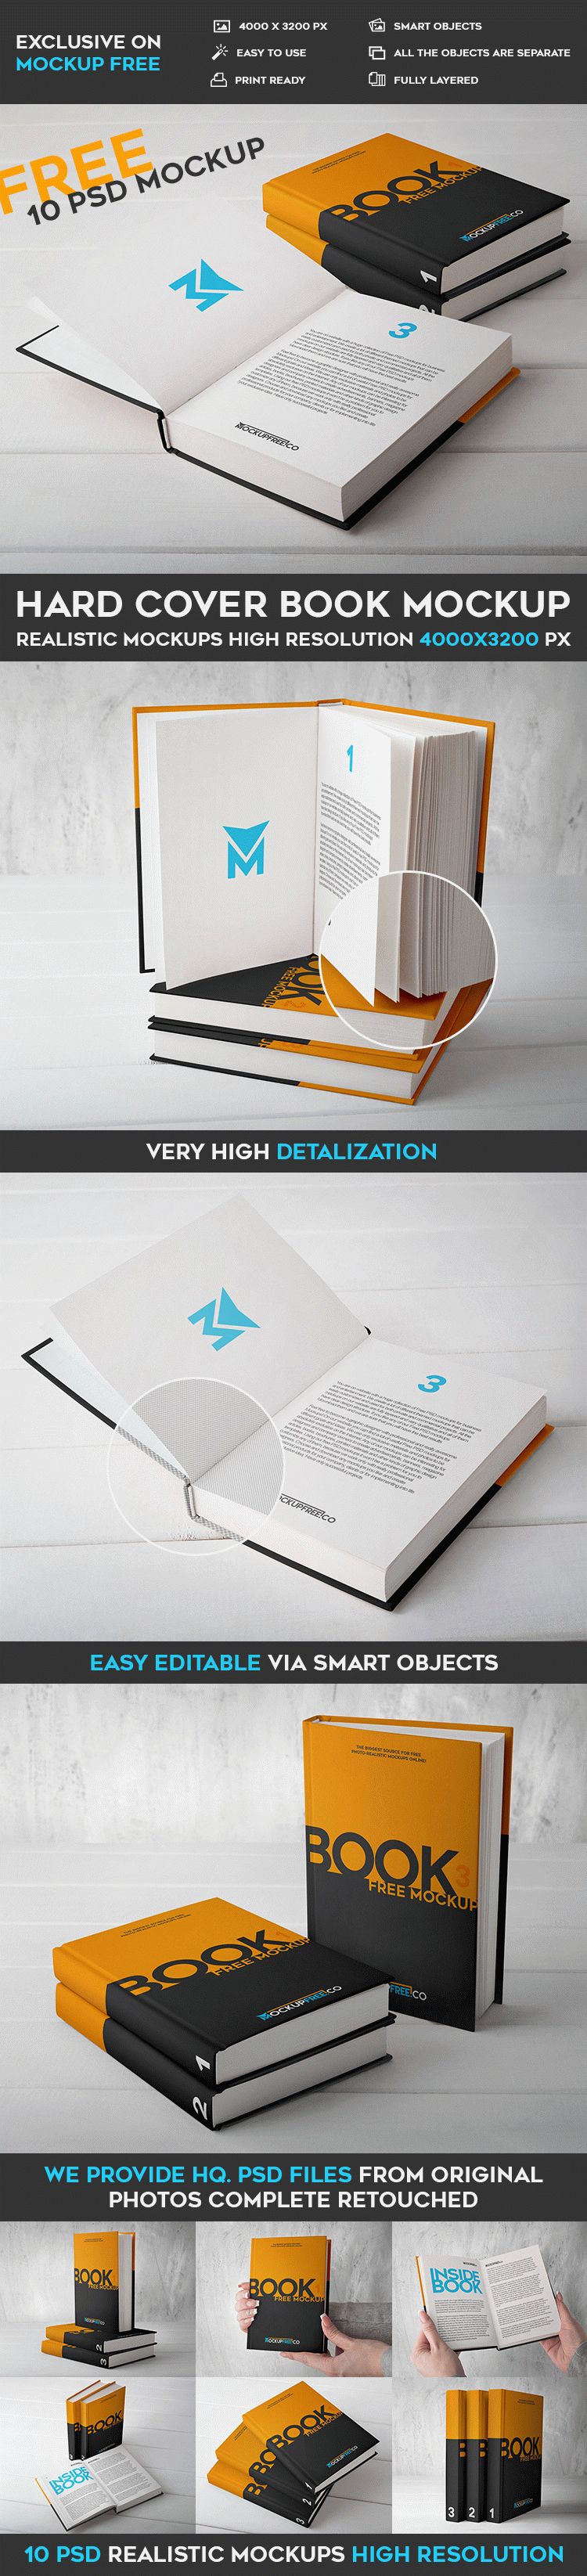 Download Hard Cover Book - 10 Free PSD Mockups | Free PSD Templates